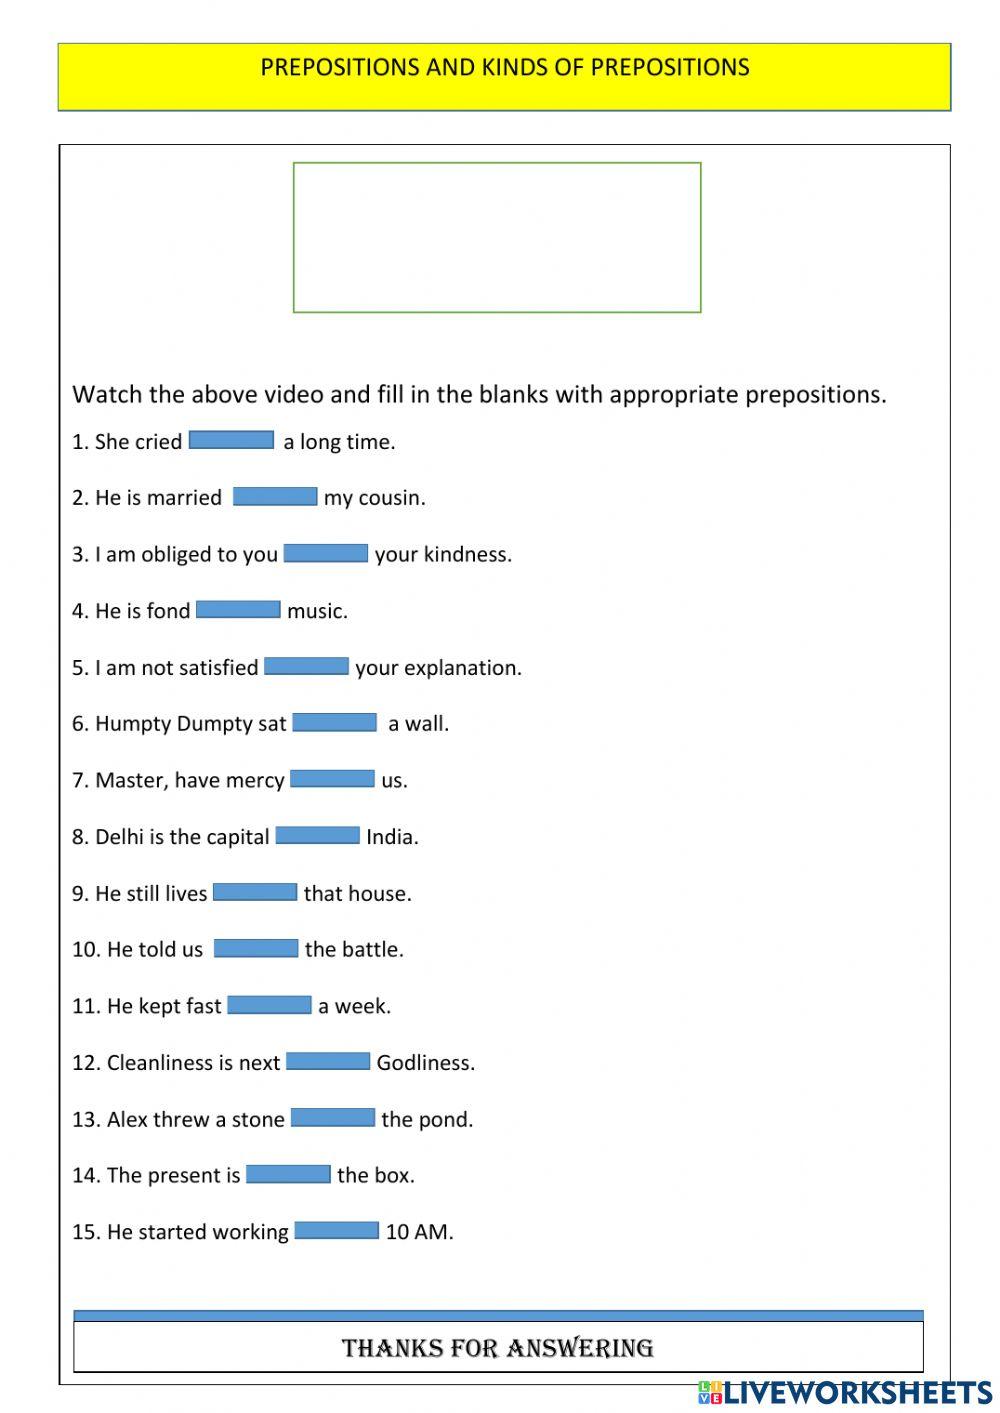 Prepositions and Kinds of Prepositions